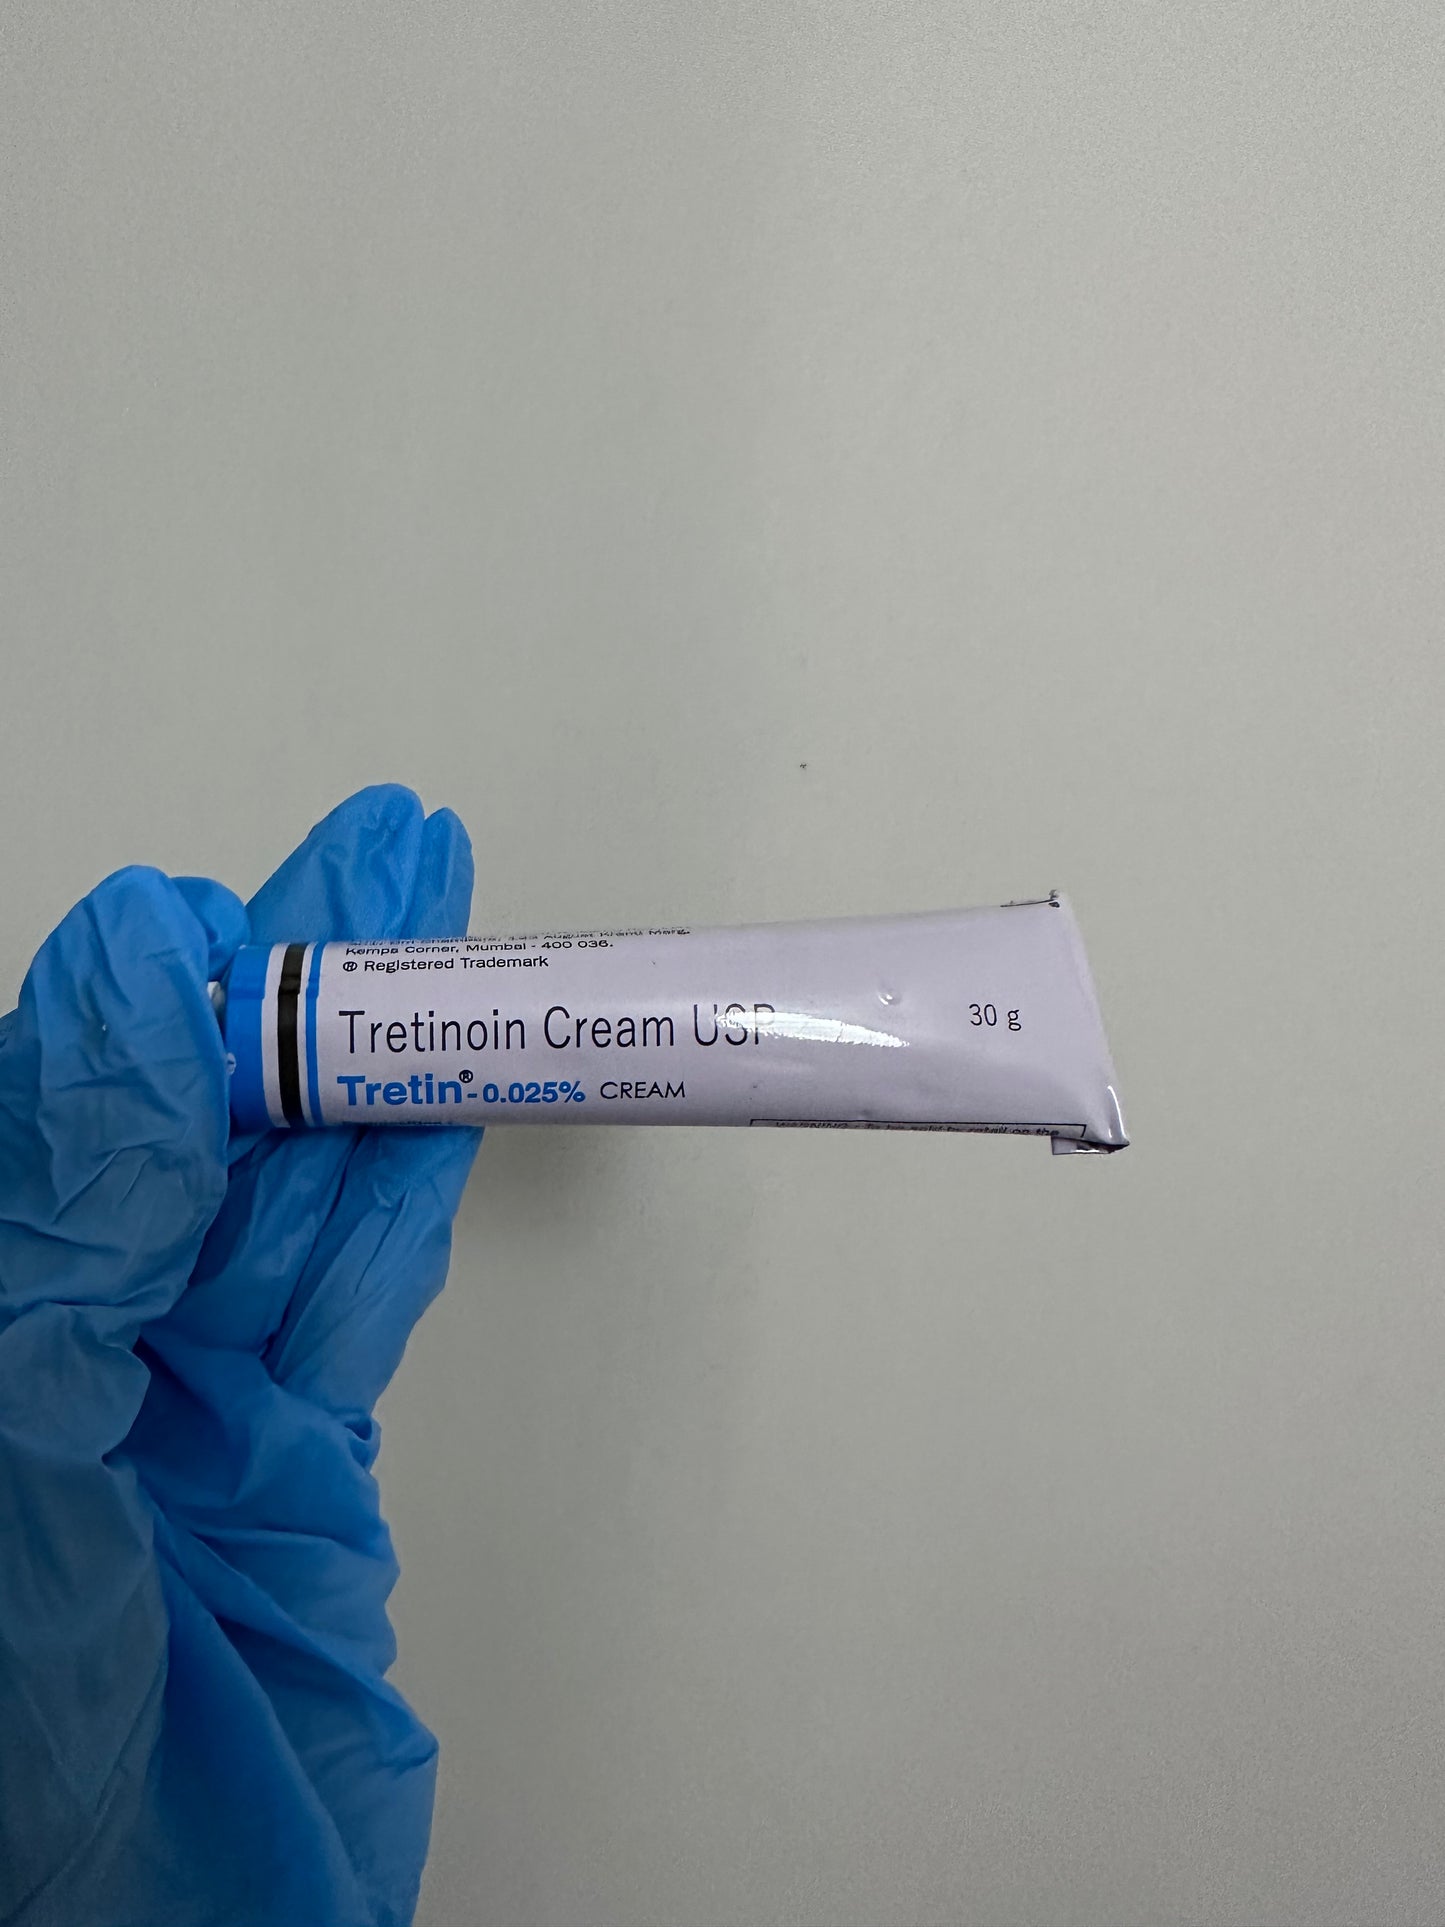 30g 0.025% Tretinoin Cream ( Lowest Strength) Best for Dry/Sensitive/Mature